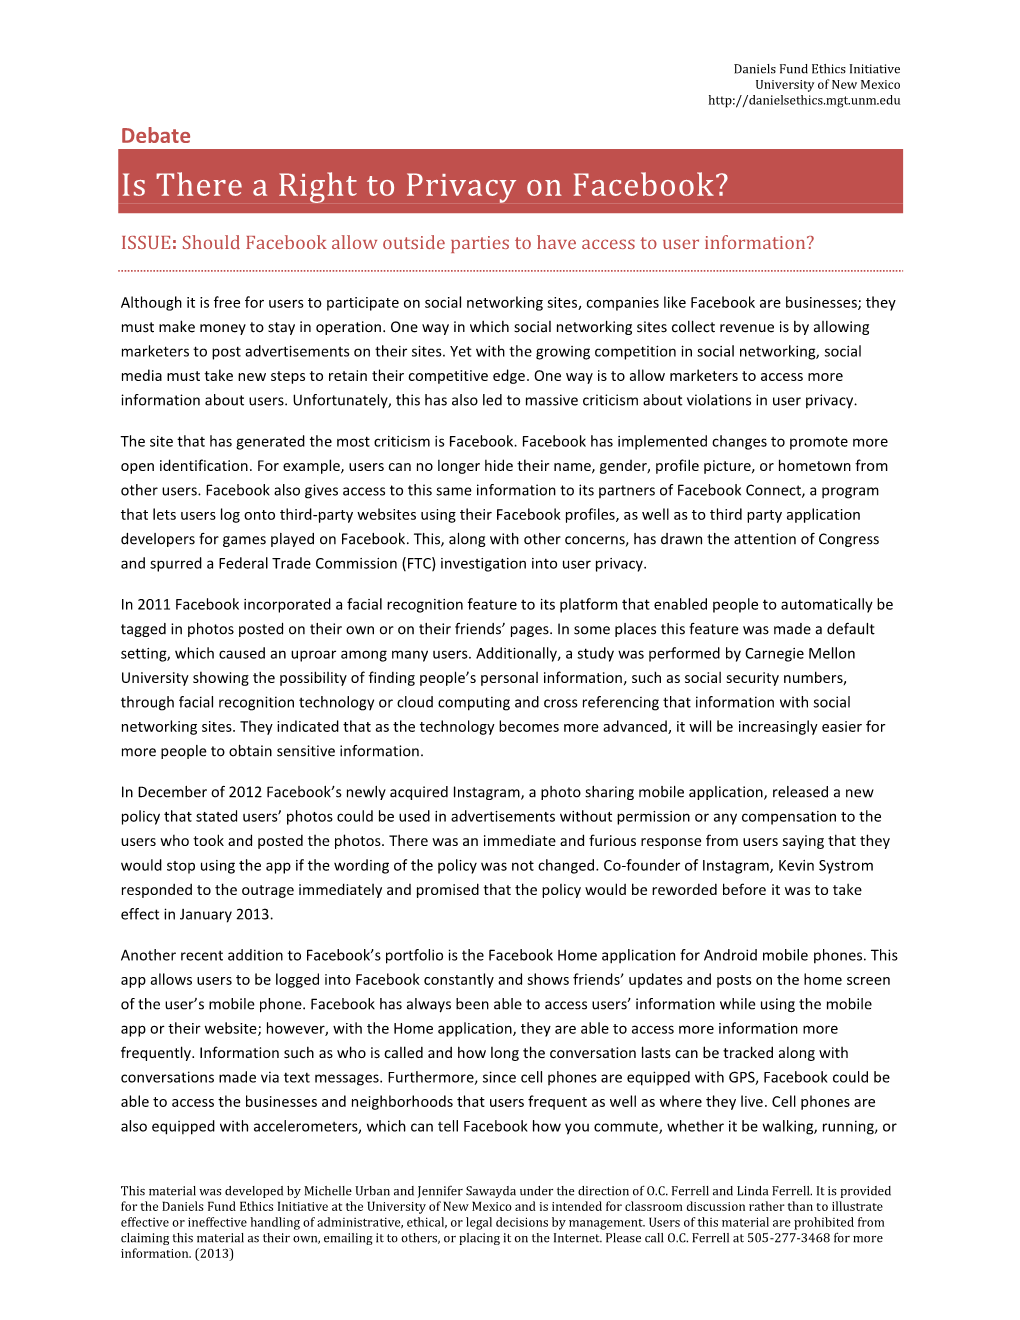 Is There a Right to Privacy on Facebook?